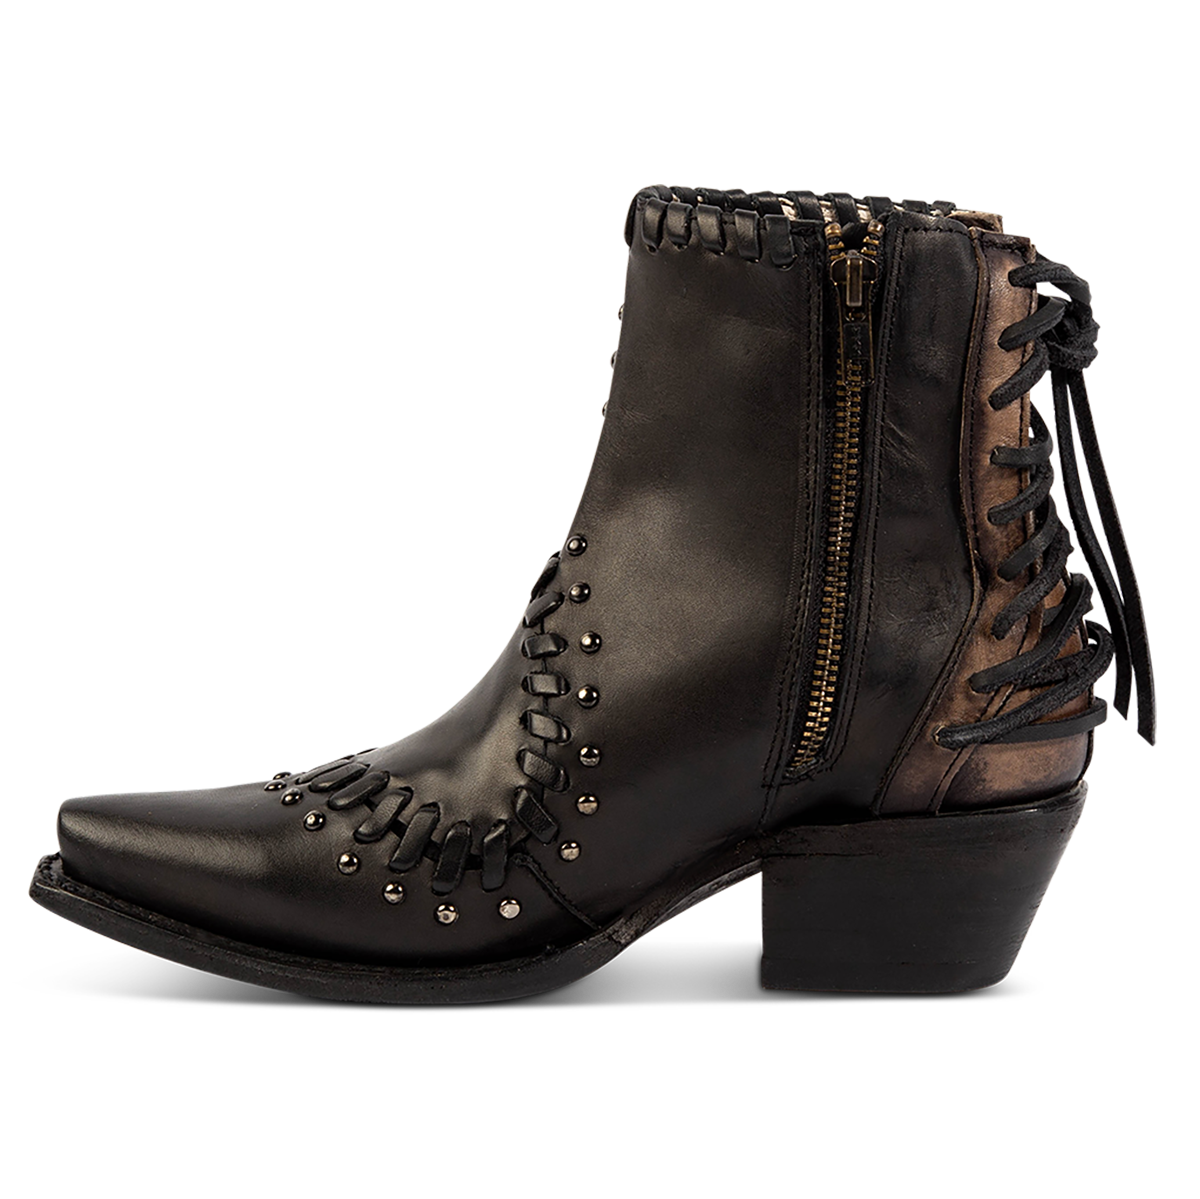 Inside view showing FREEBIRD women's Walker black leather bootie with asymmetrical whip stitch detailing, stud embellishments and back heel lacing